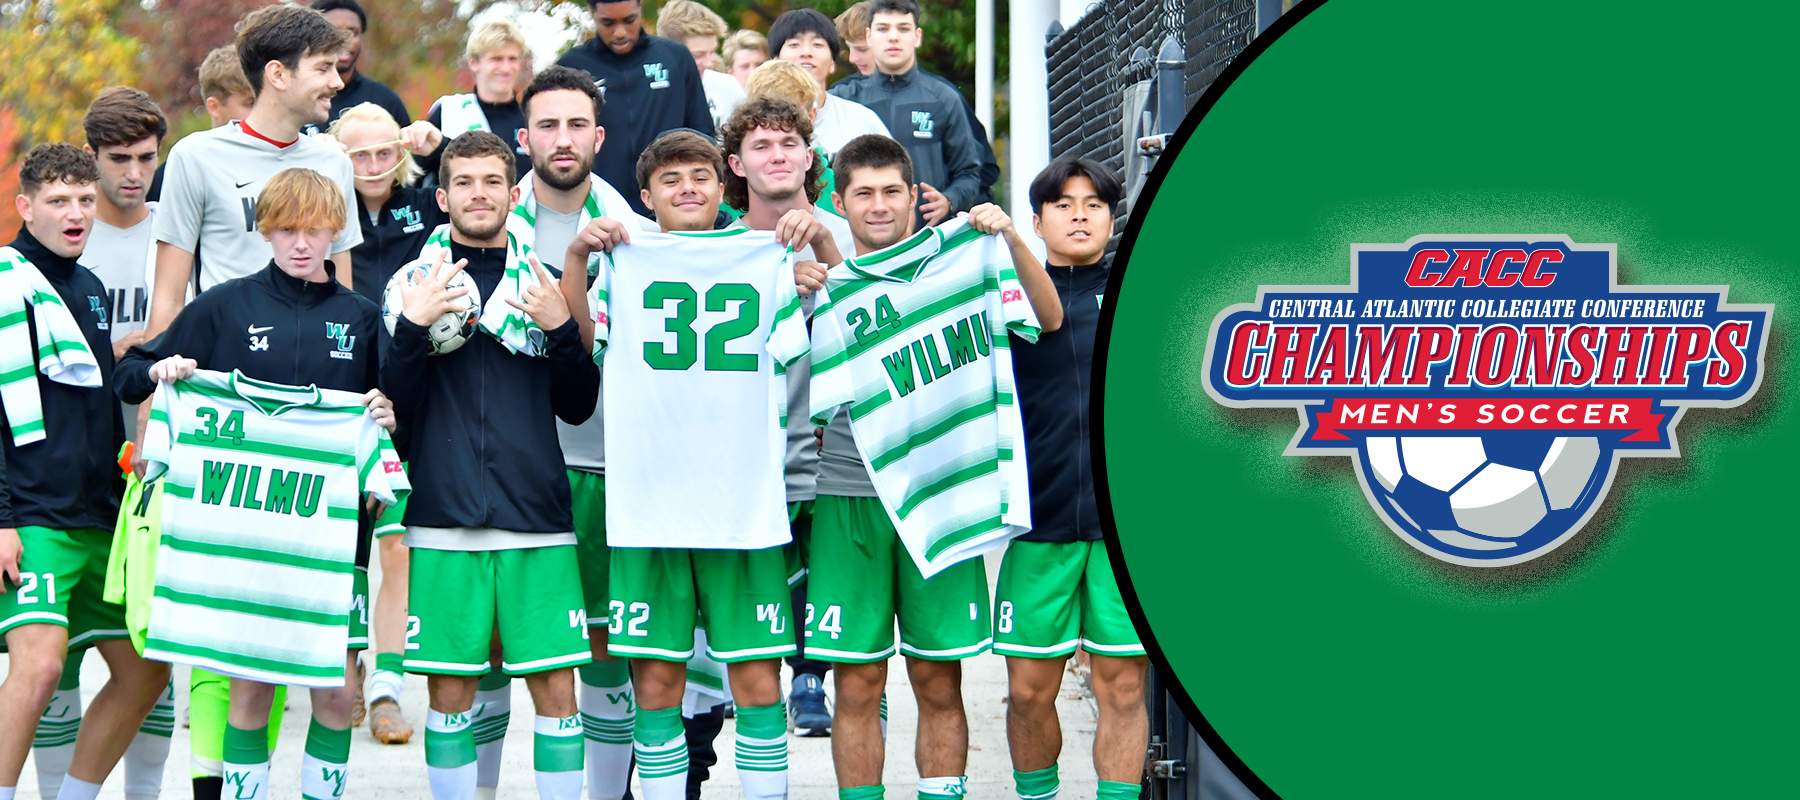 PLAYOFF PREVIEW: No. 4 Seed Men’s Soccer Seeks First CACC Tournament Championship Since 2007